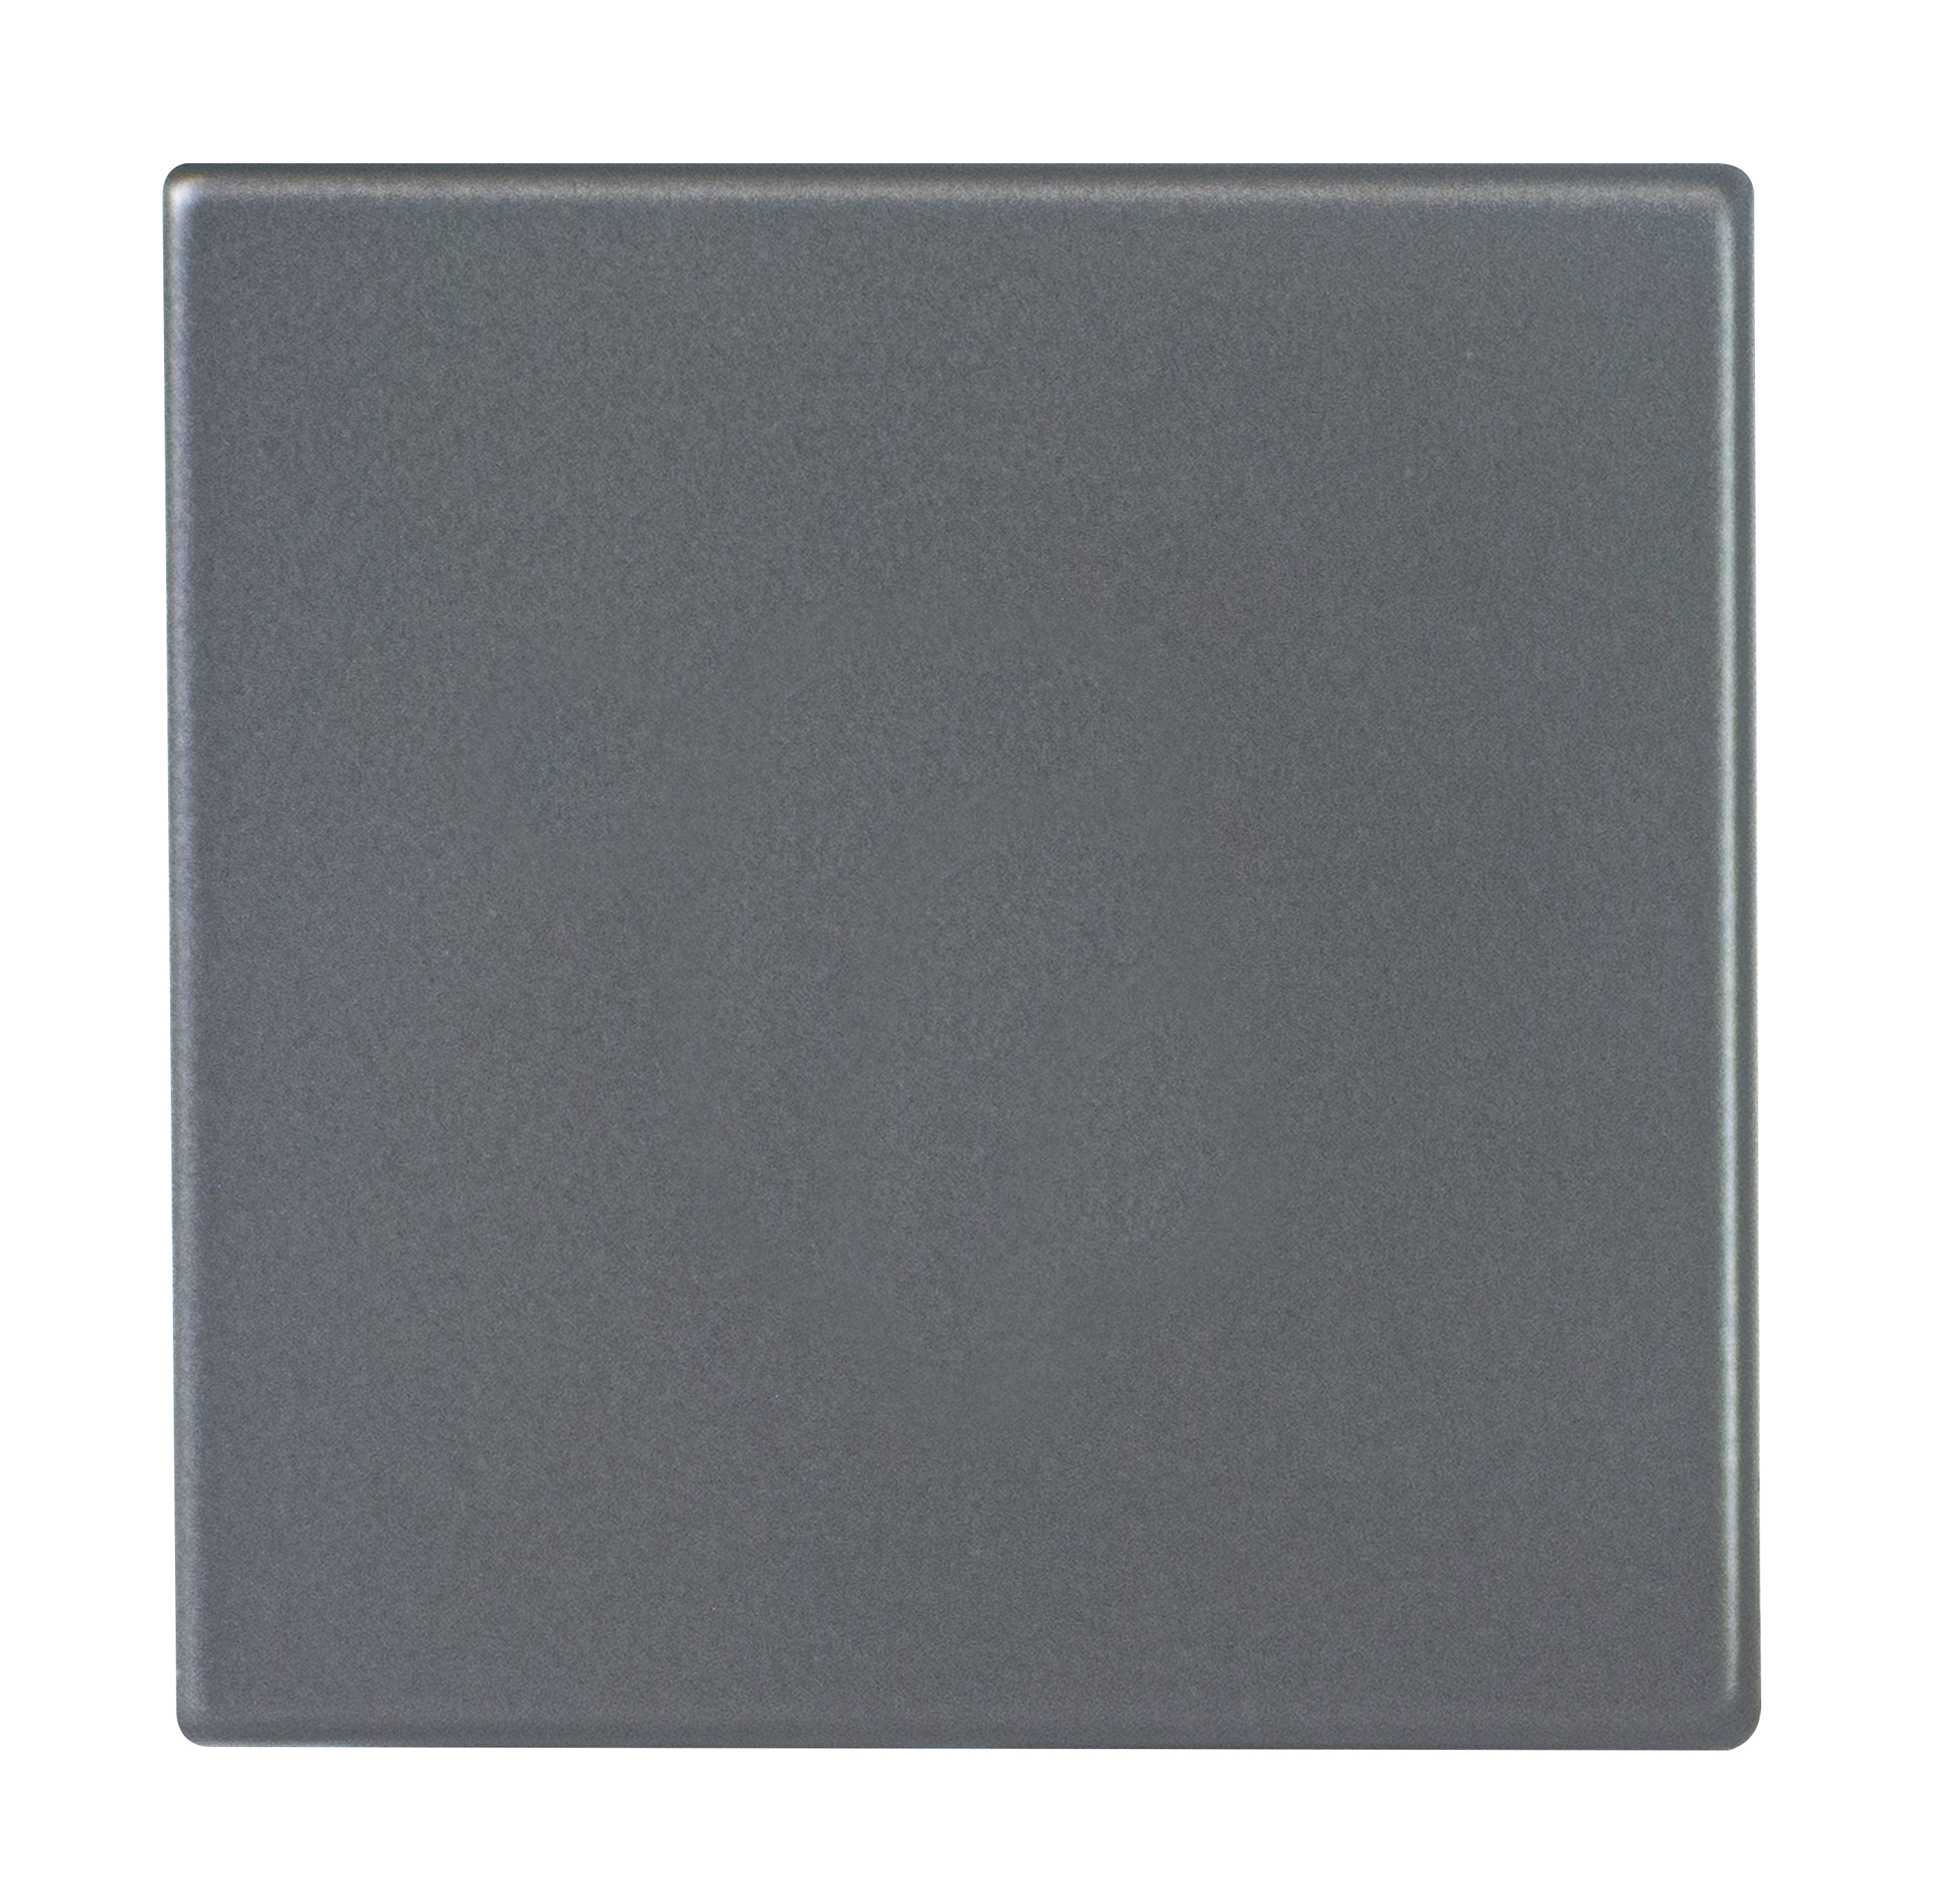 Hamln 7G2ABPS Blank Plate 87.4x87.4mm